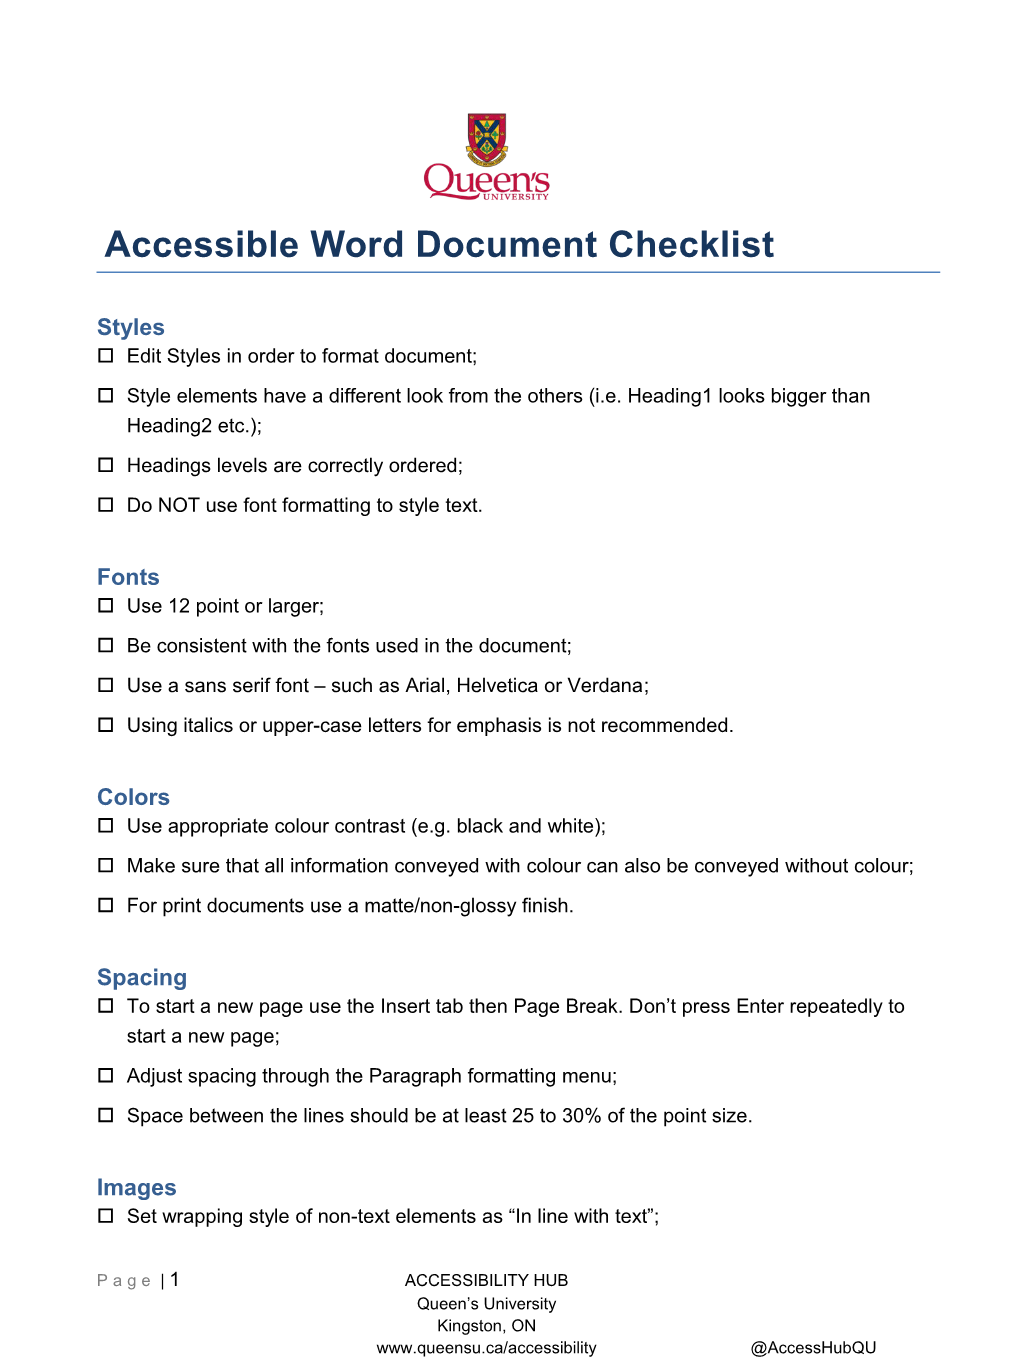 Accessible Document Checklist